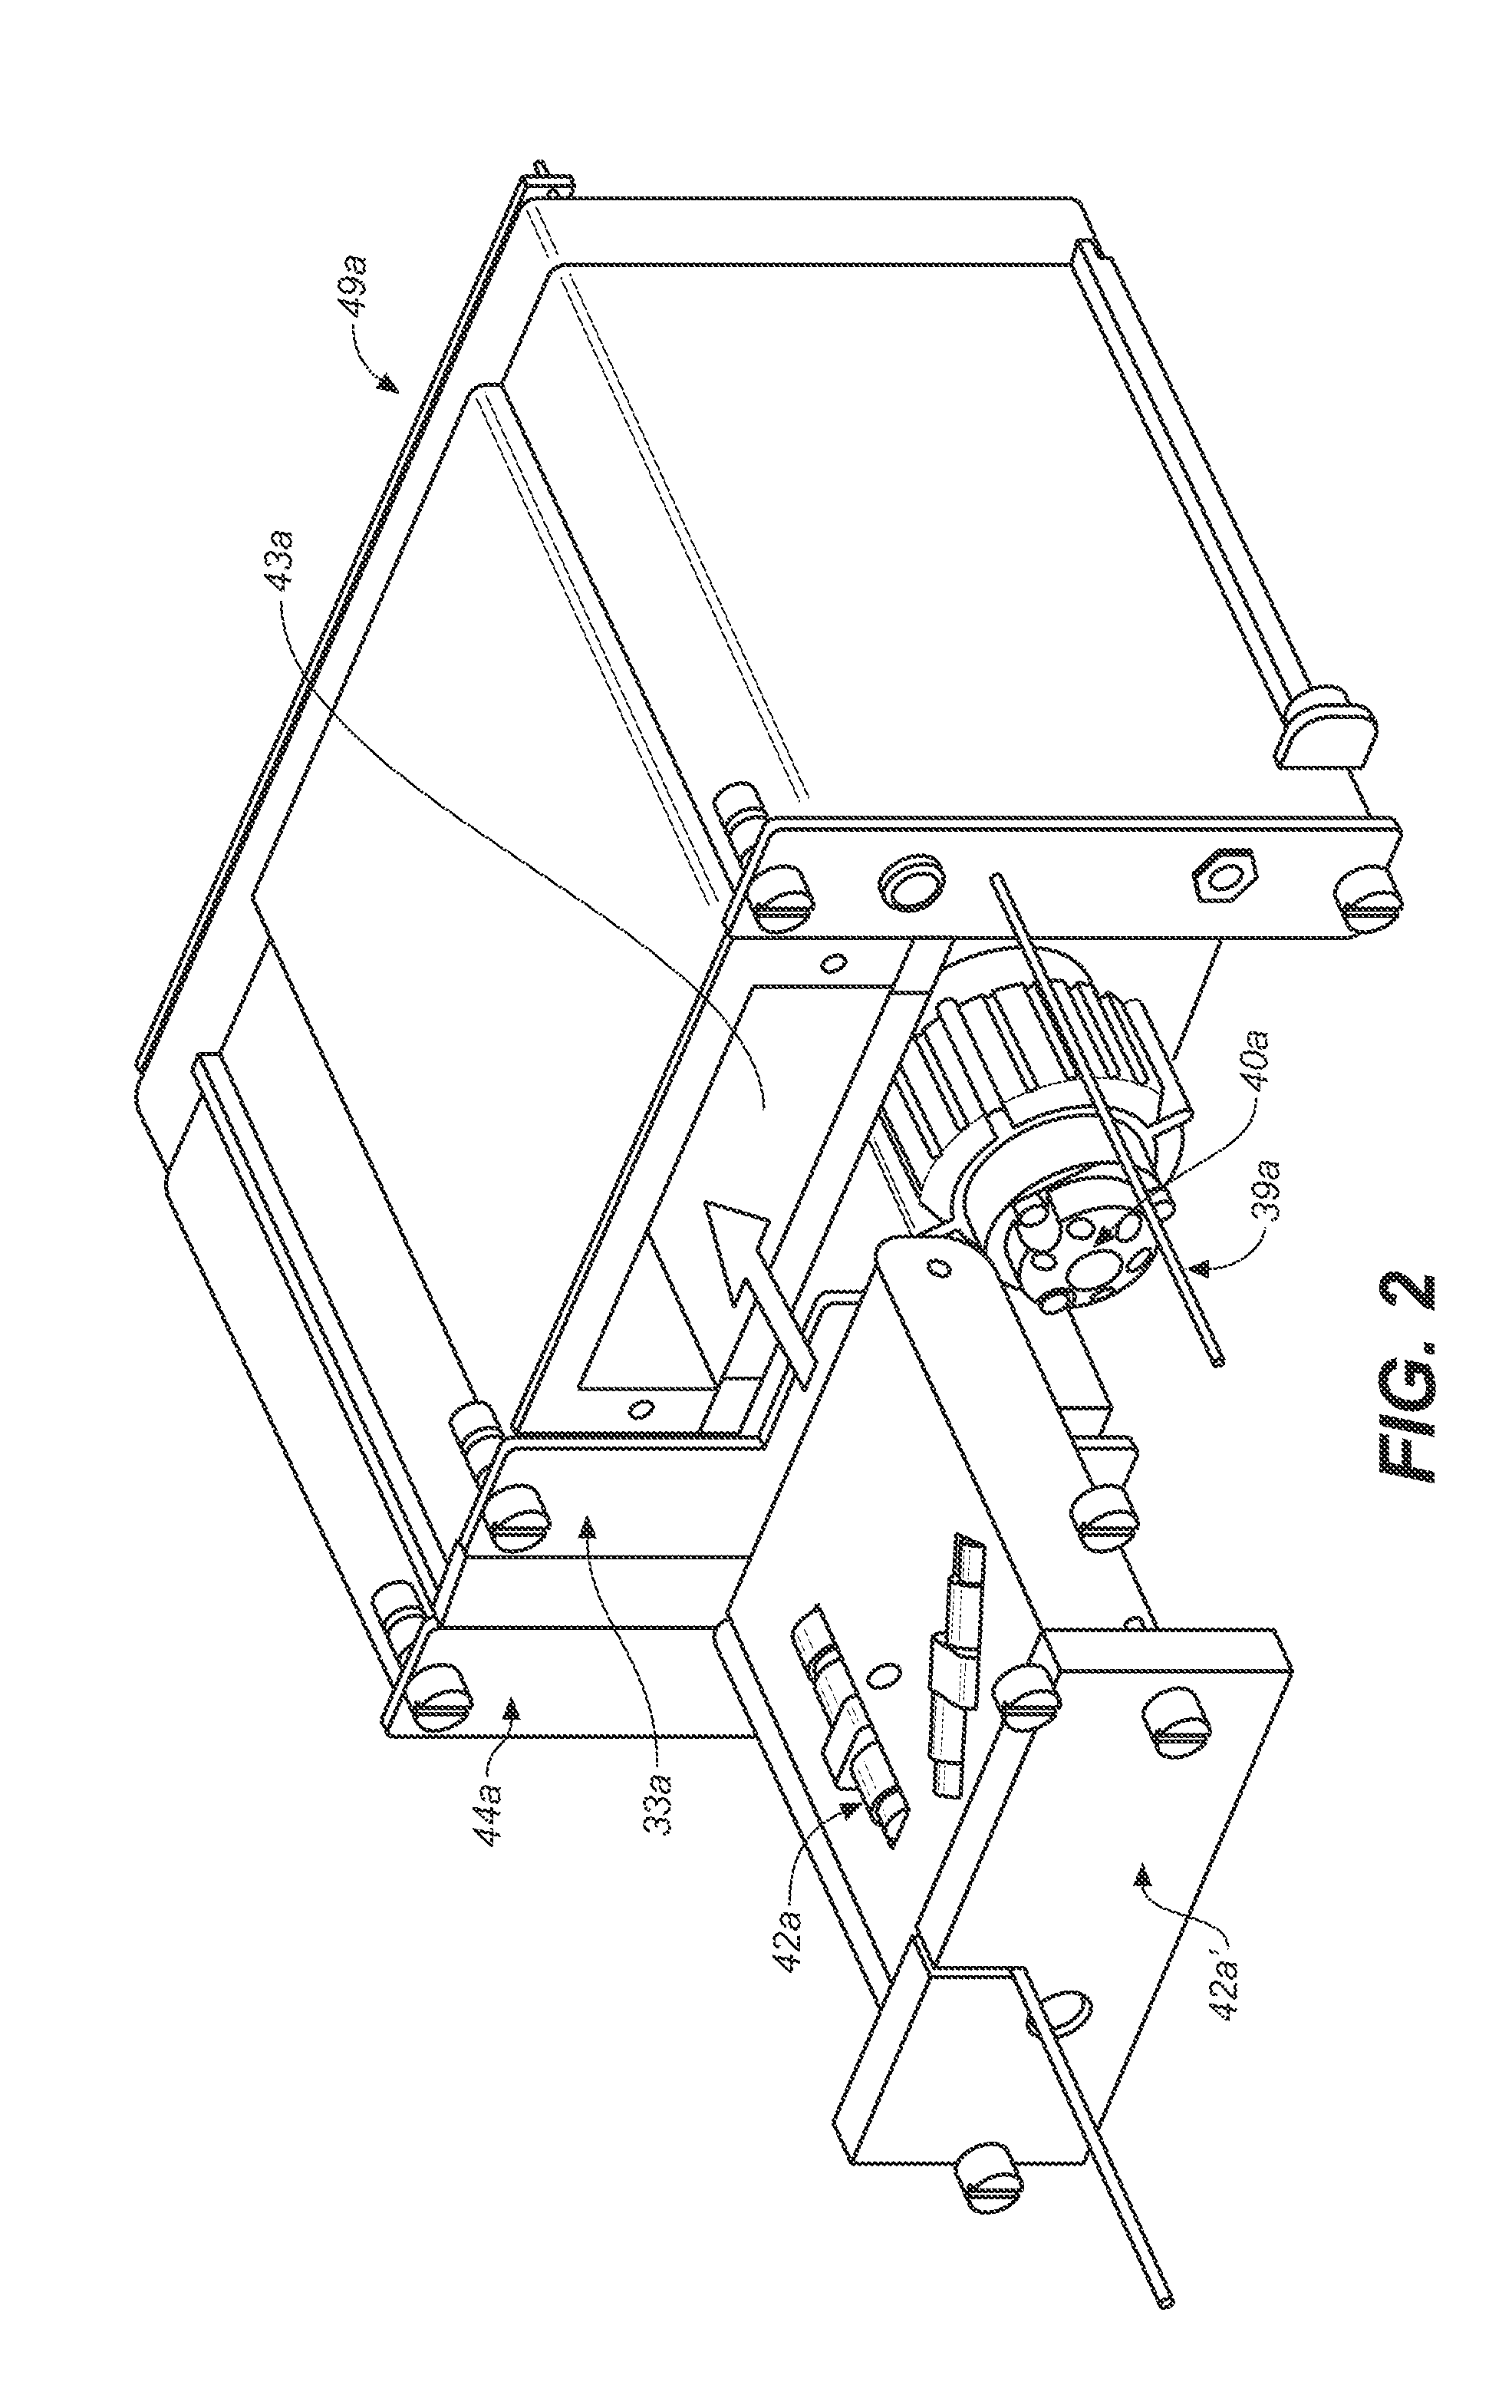 Multichannel ion chromatography system and method